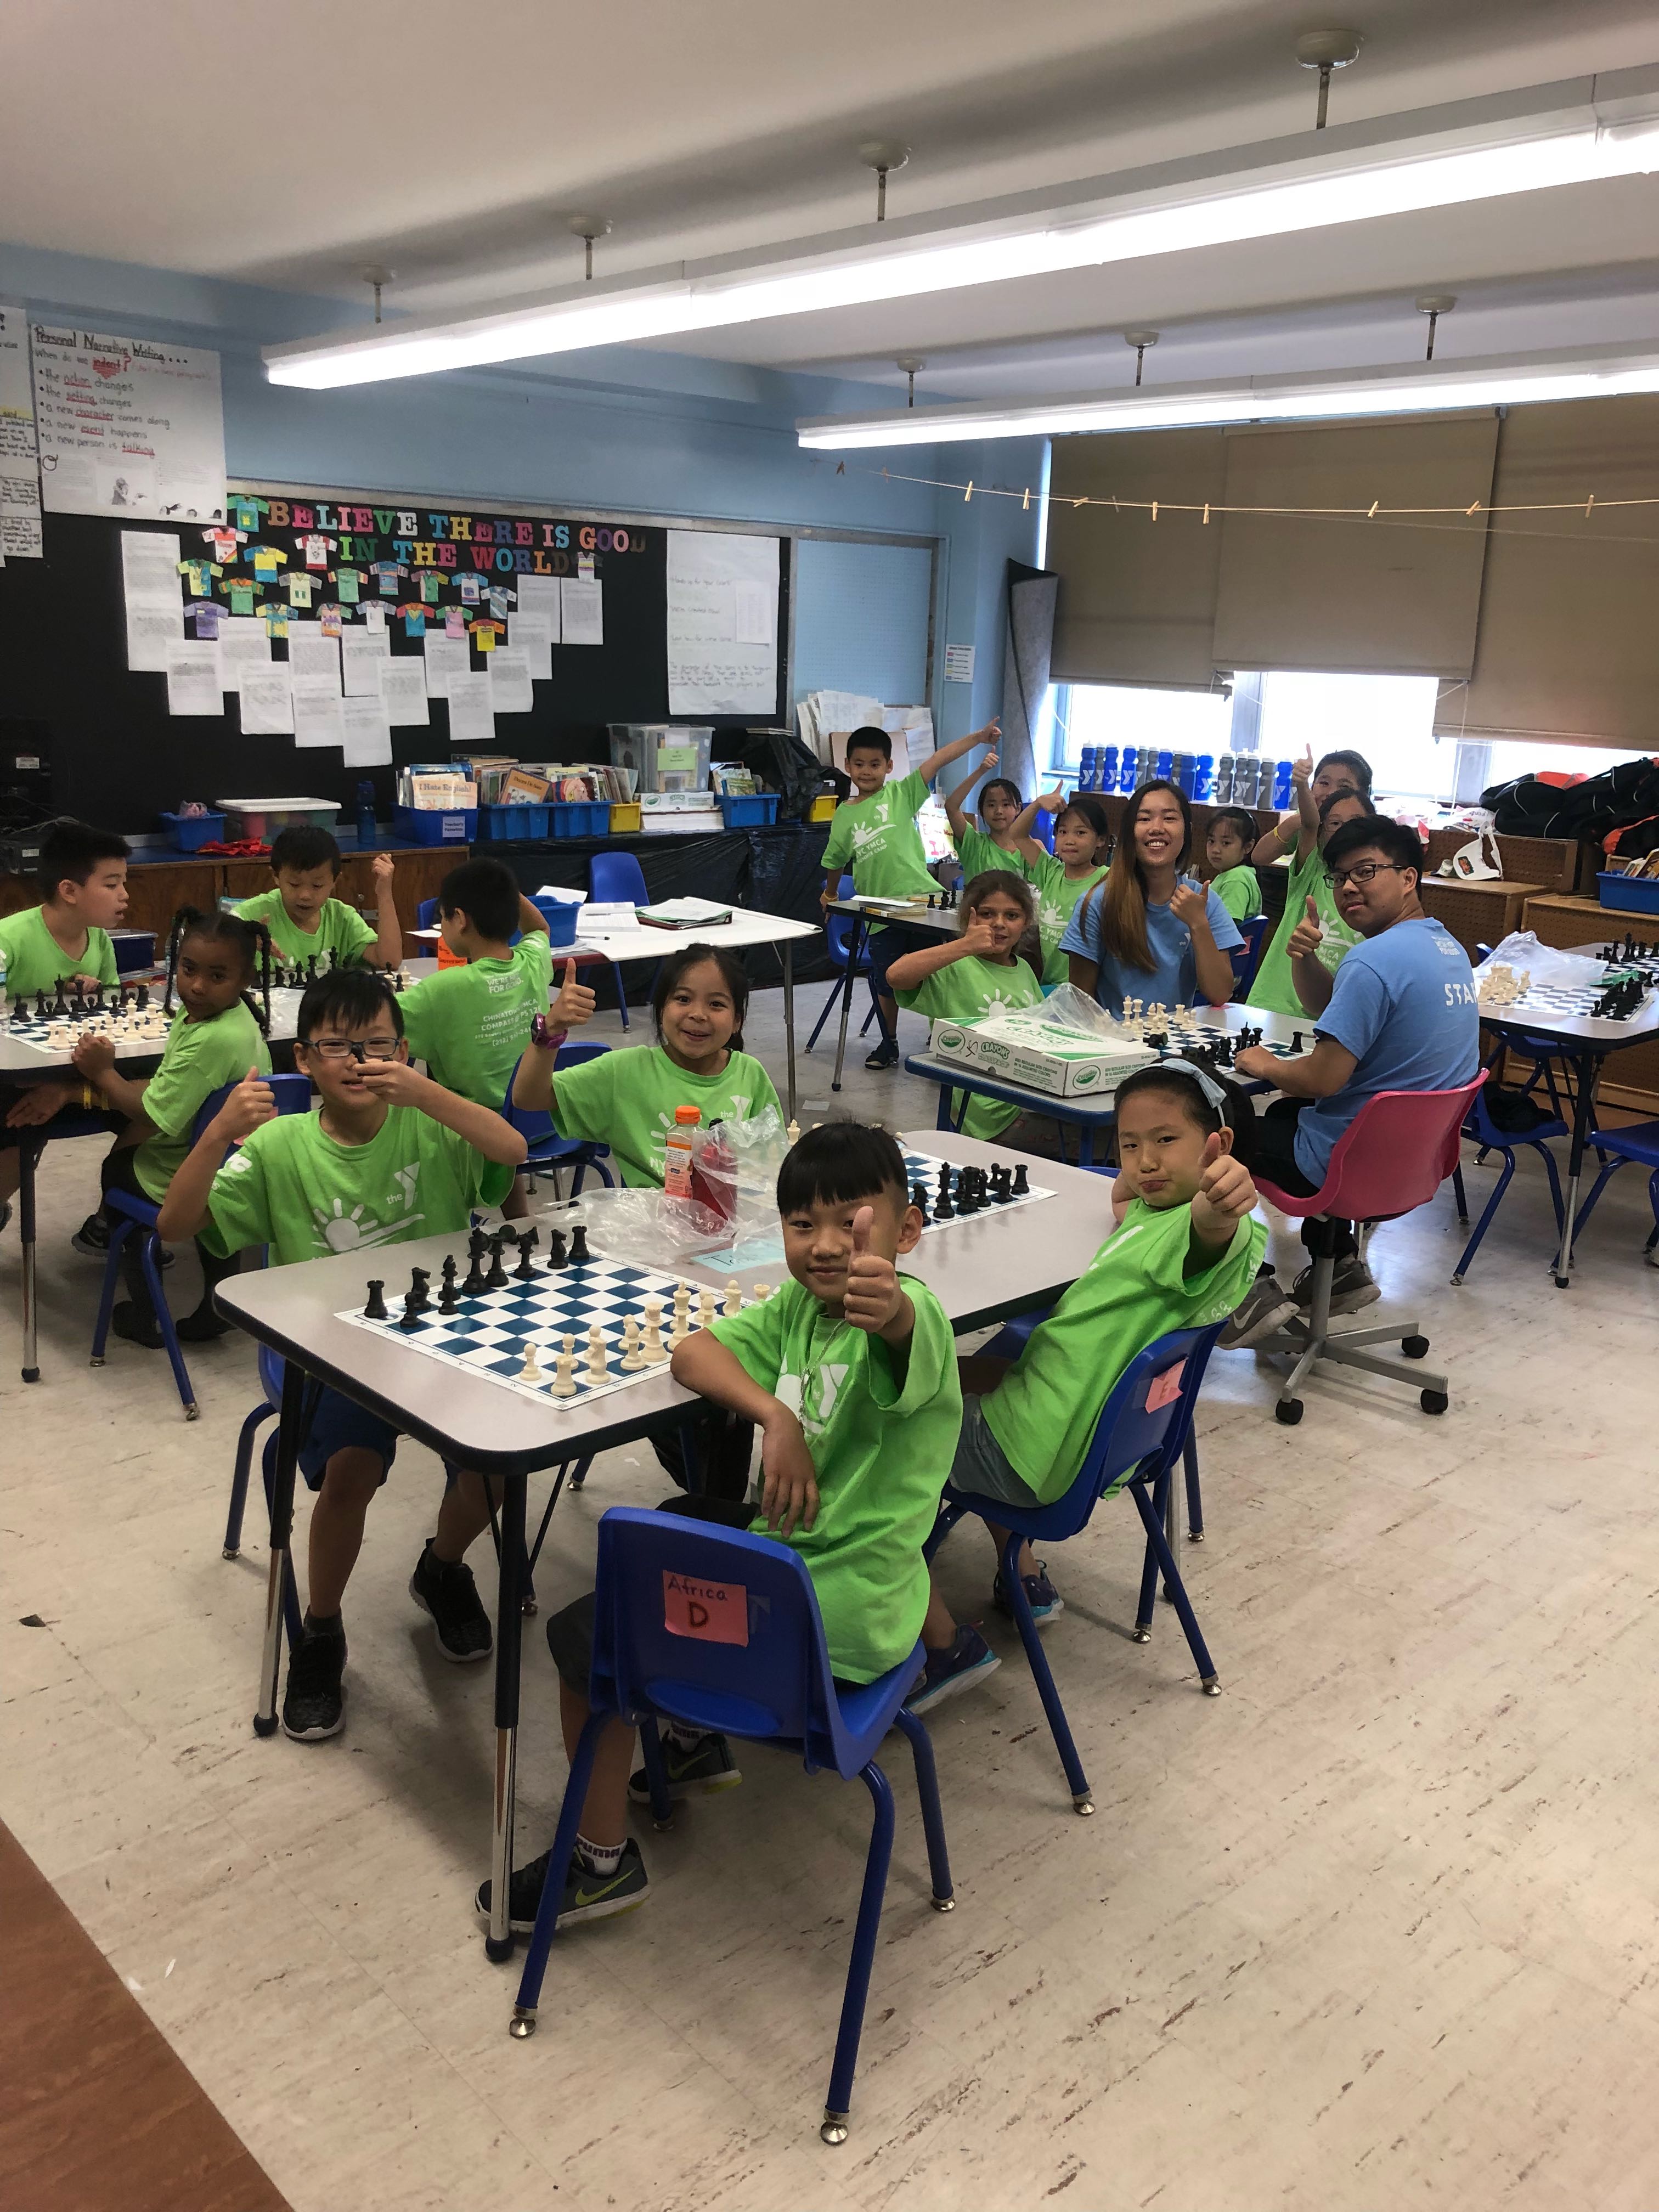 Chess in the Schools Summer Camps and Programs Teaching Over 1,000